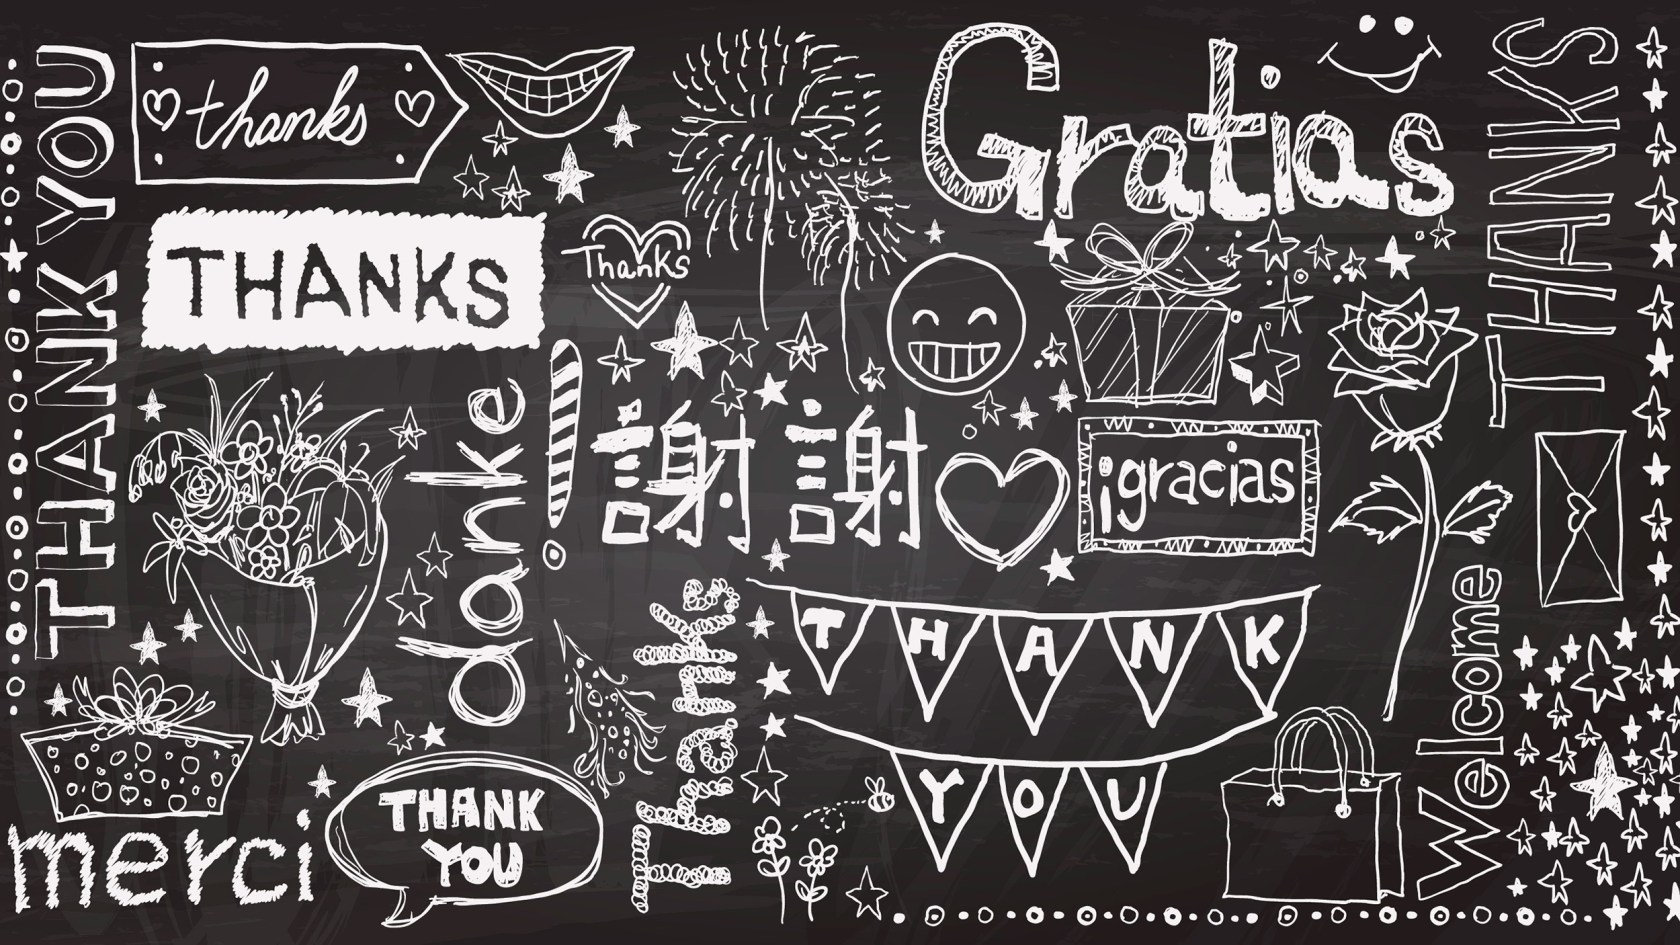 Thank you written in various languages on a chalkboard.